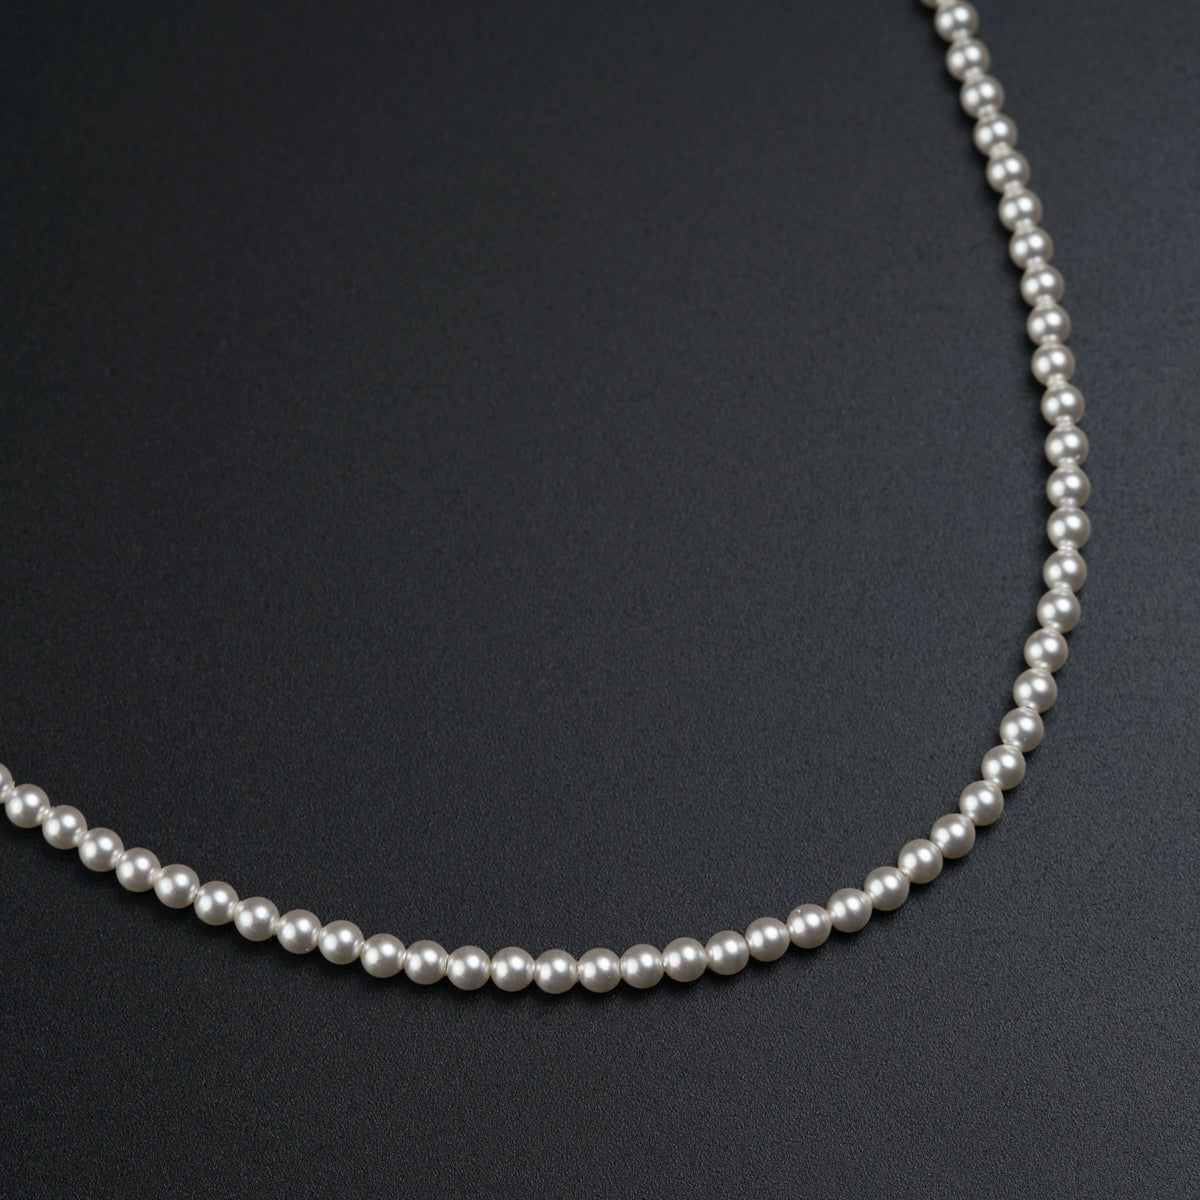 a single strand of pearls on a black surface